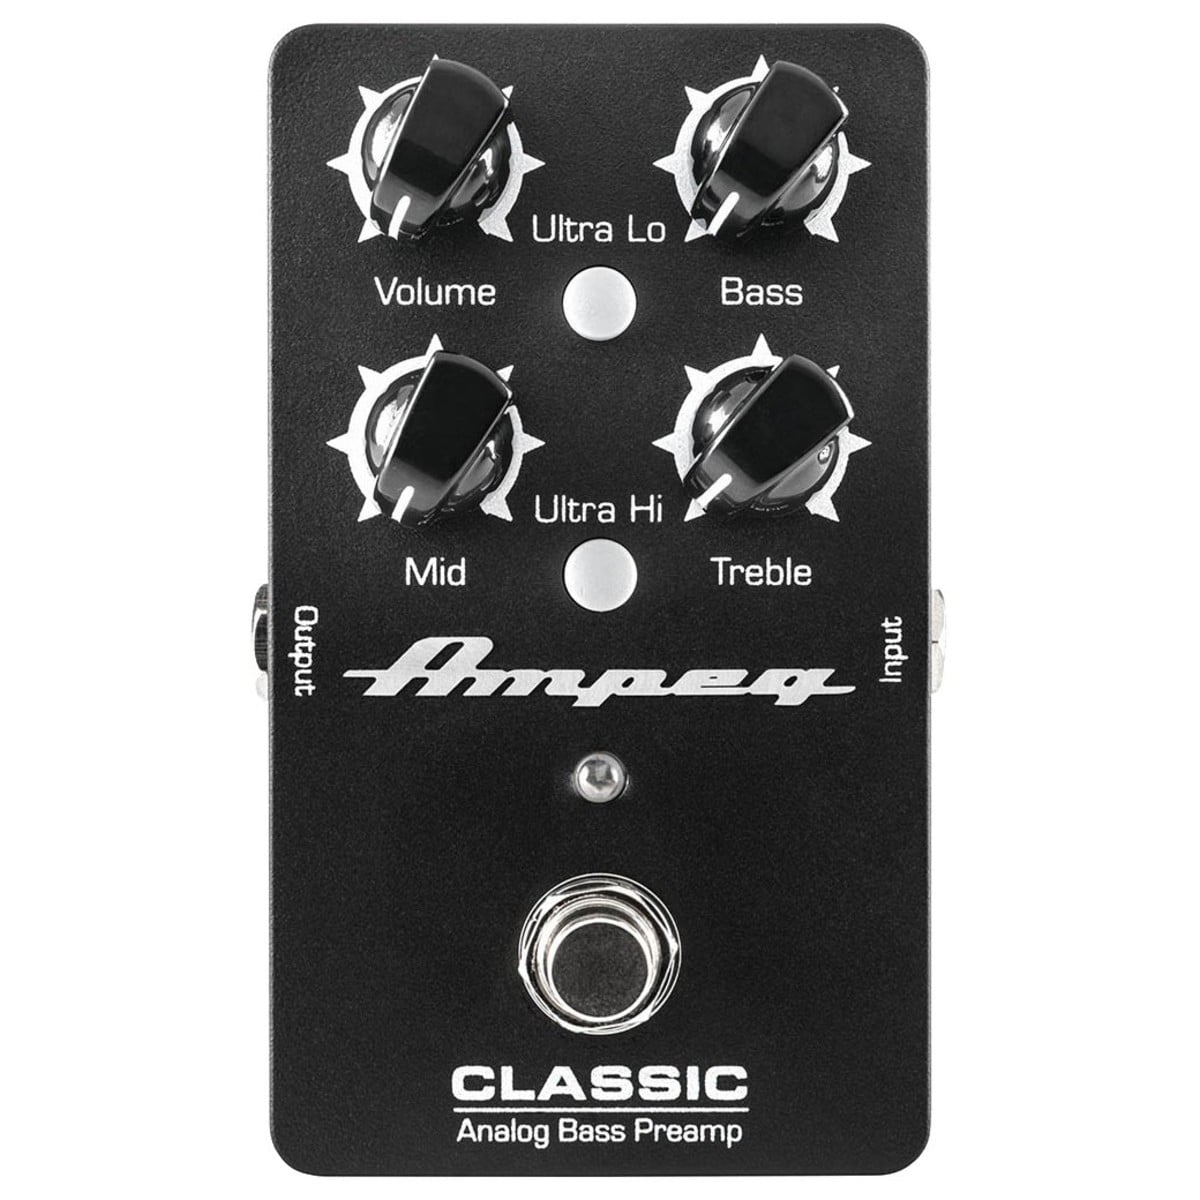 Ampeg Classic Analog Bass Preamp Pedal - New Ampeg        Preamp             Bass Analogue  Guitar Effect Pedal